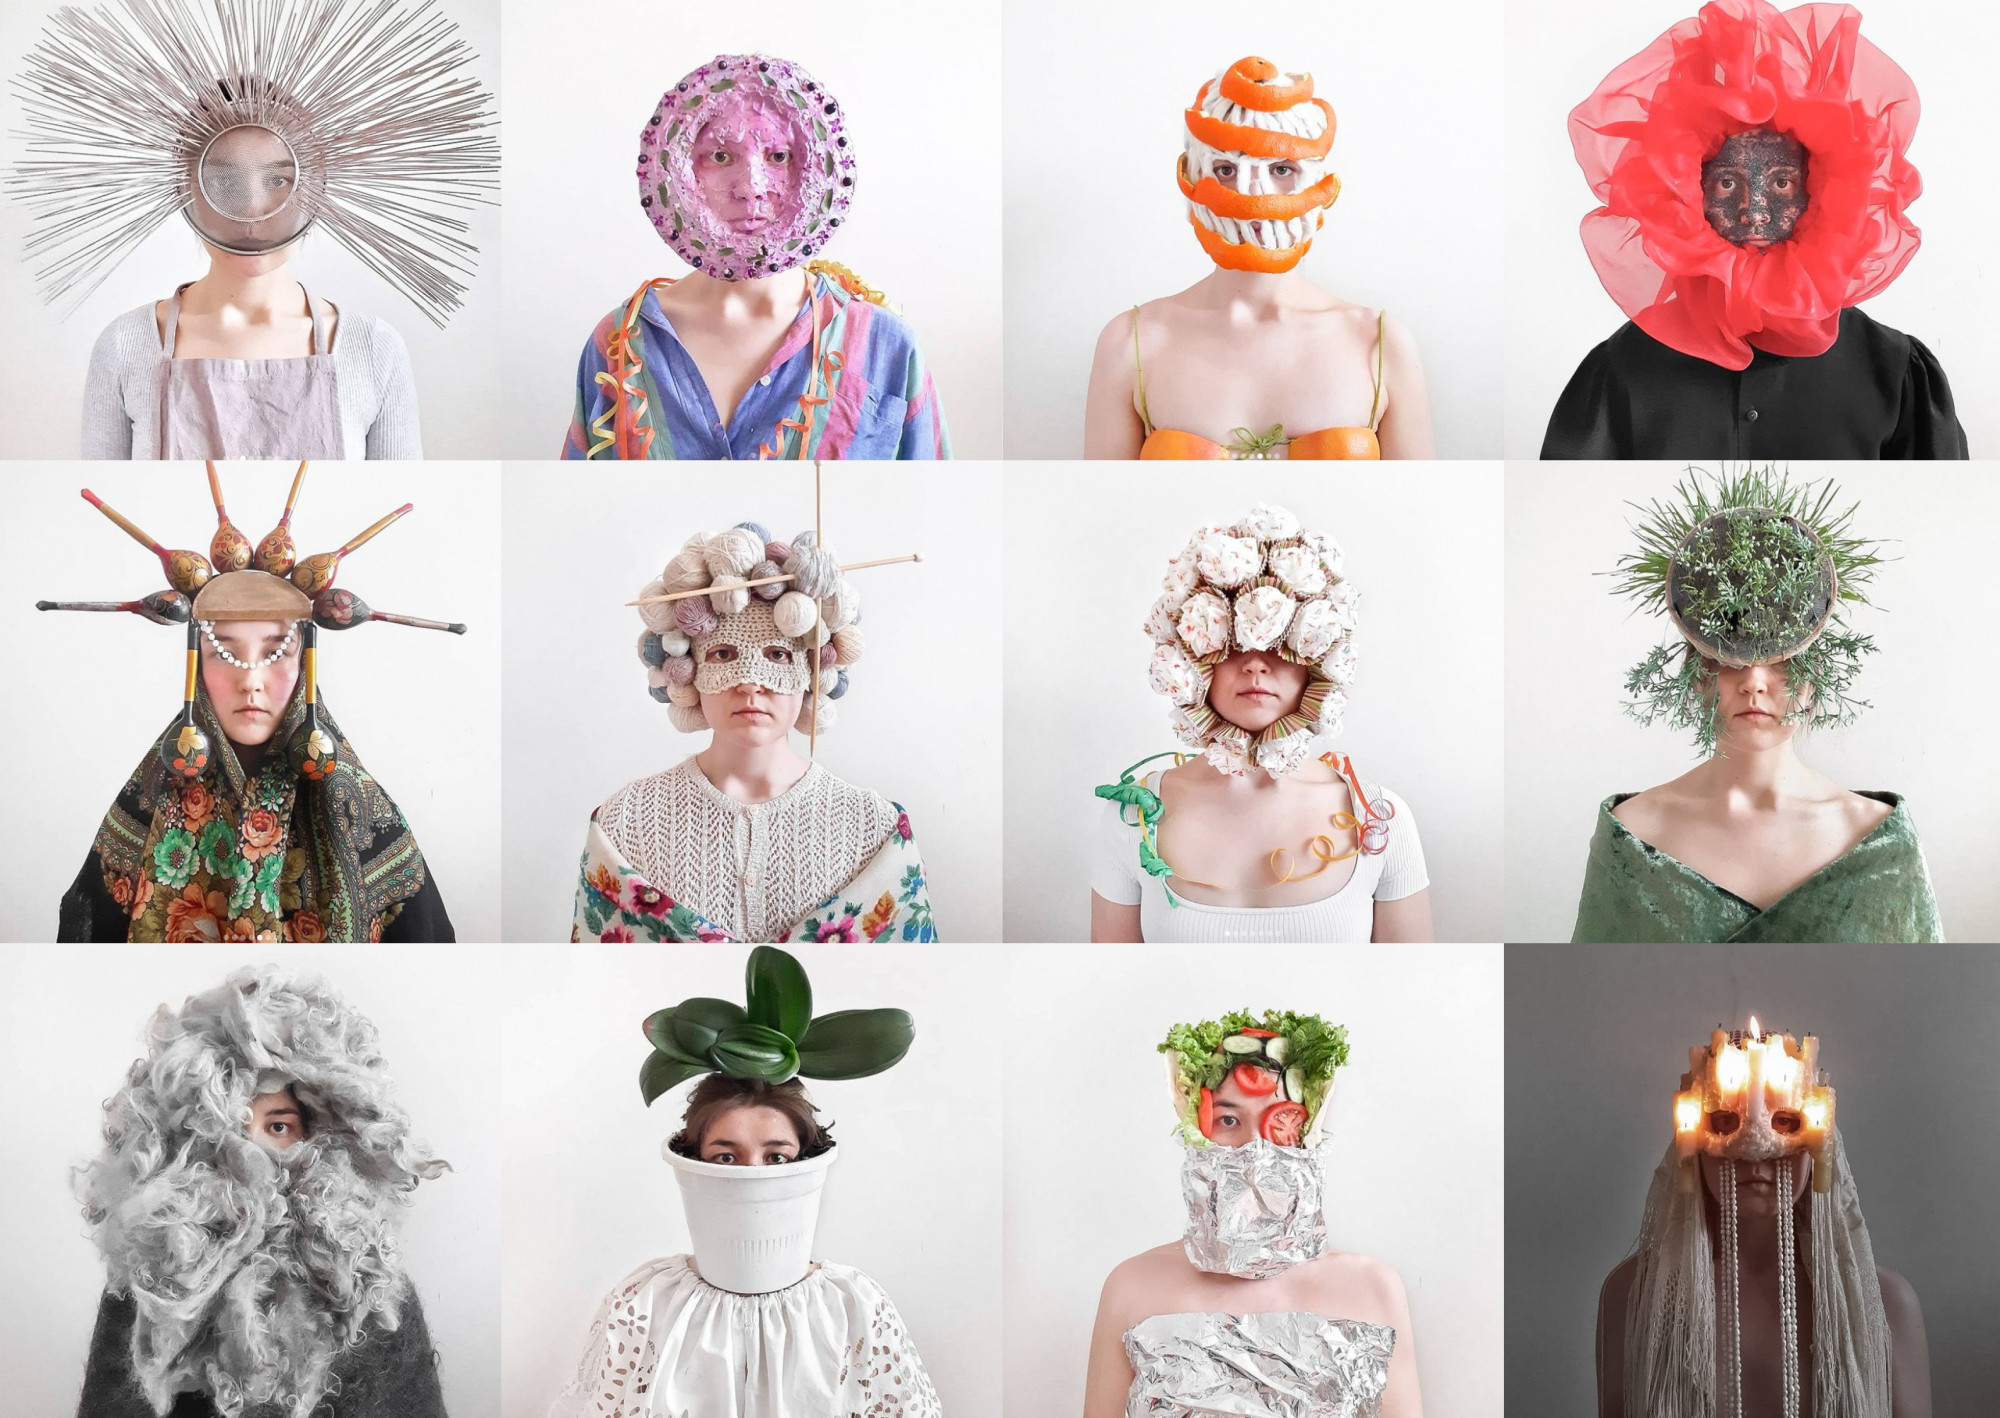 Untitled, 2020. This series of masks was made from items which were found in an apartment space